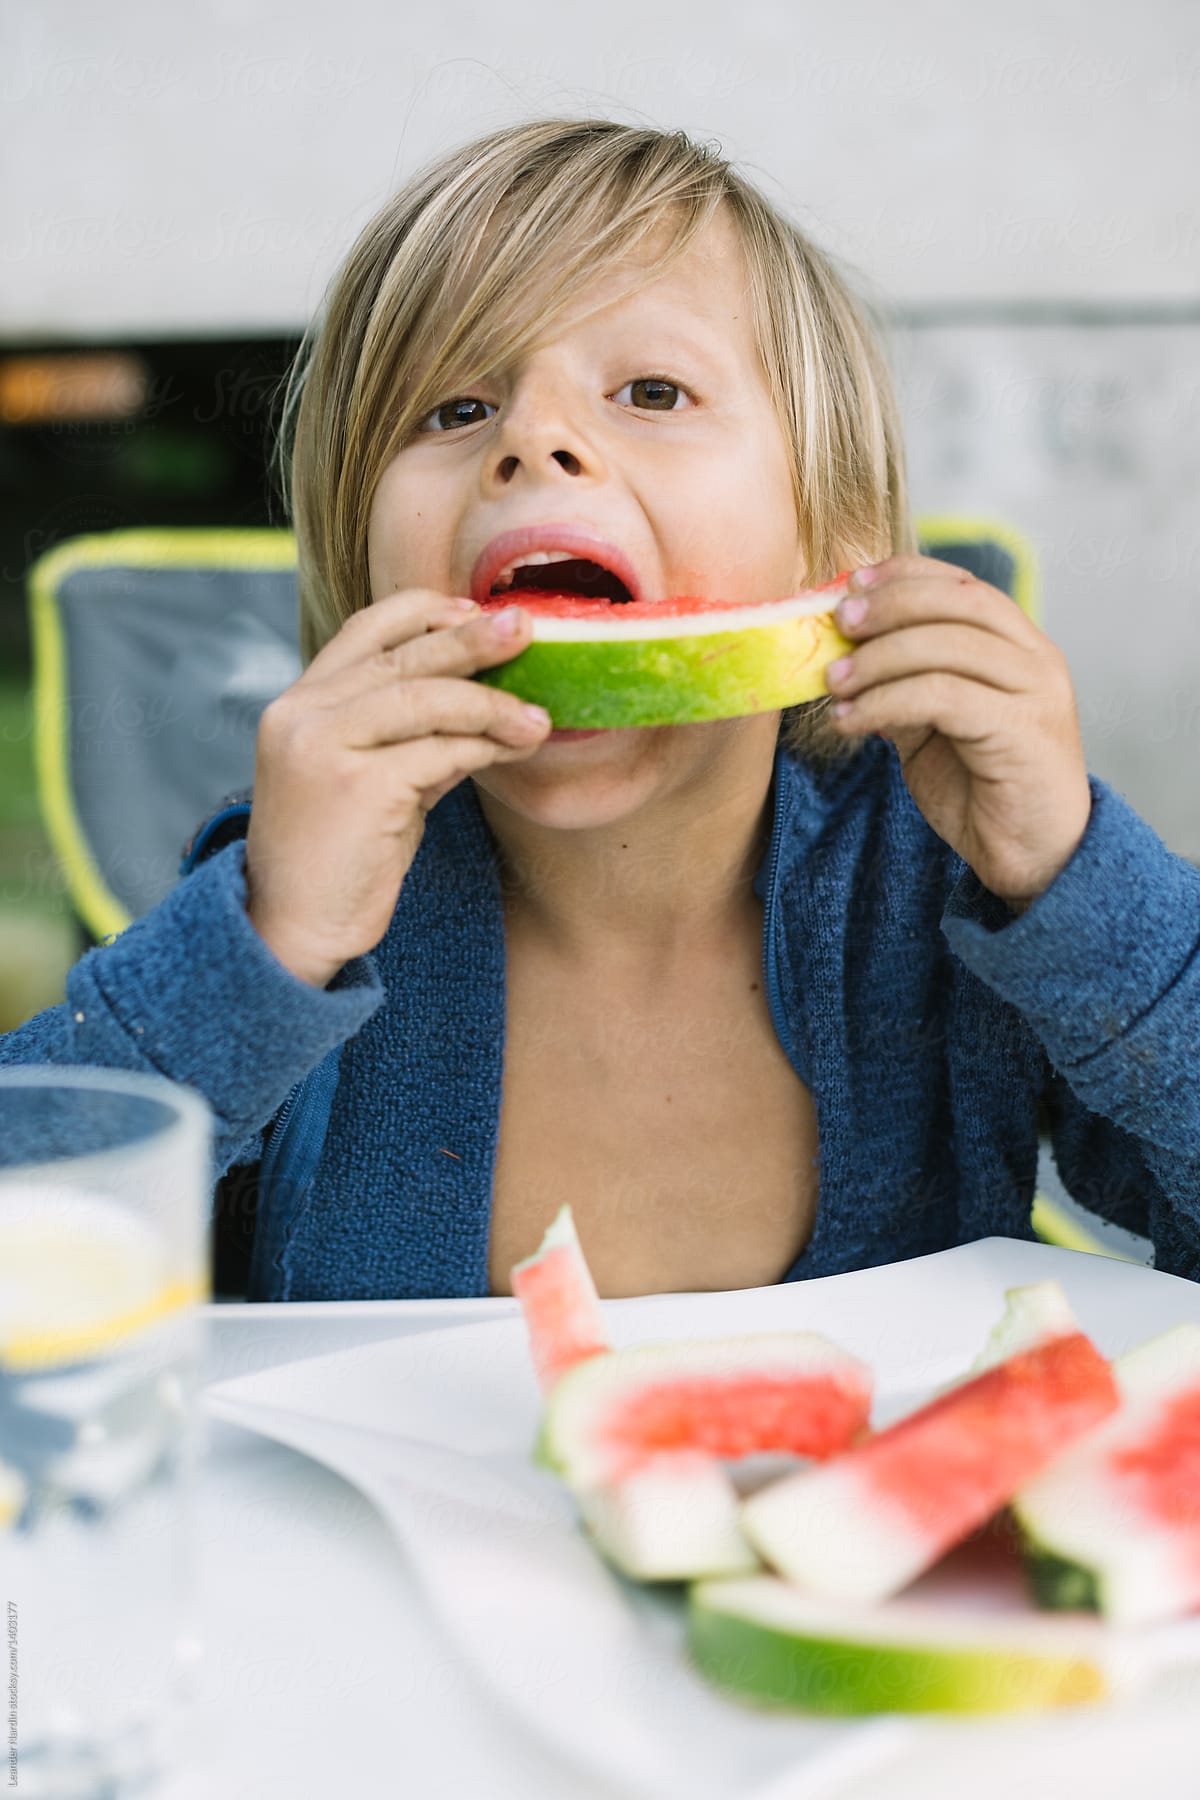 cute little toddler with long blonde hair eating water melon outdoors